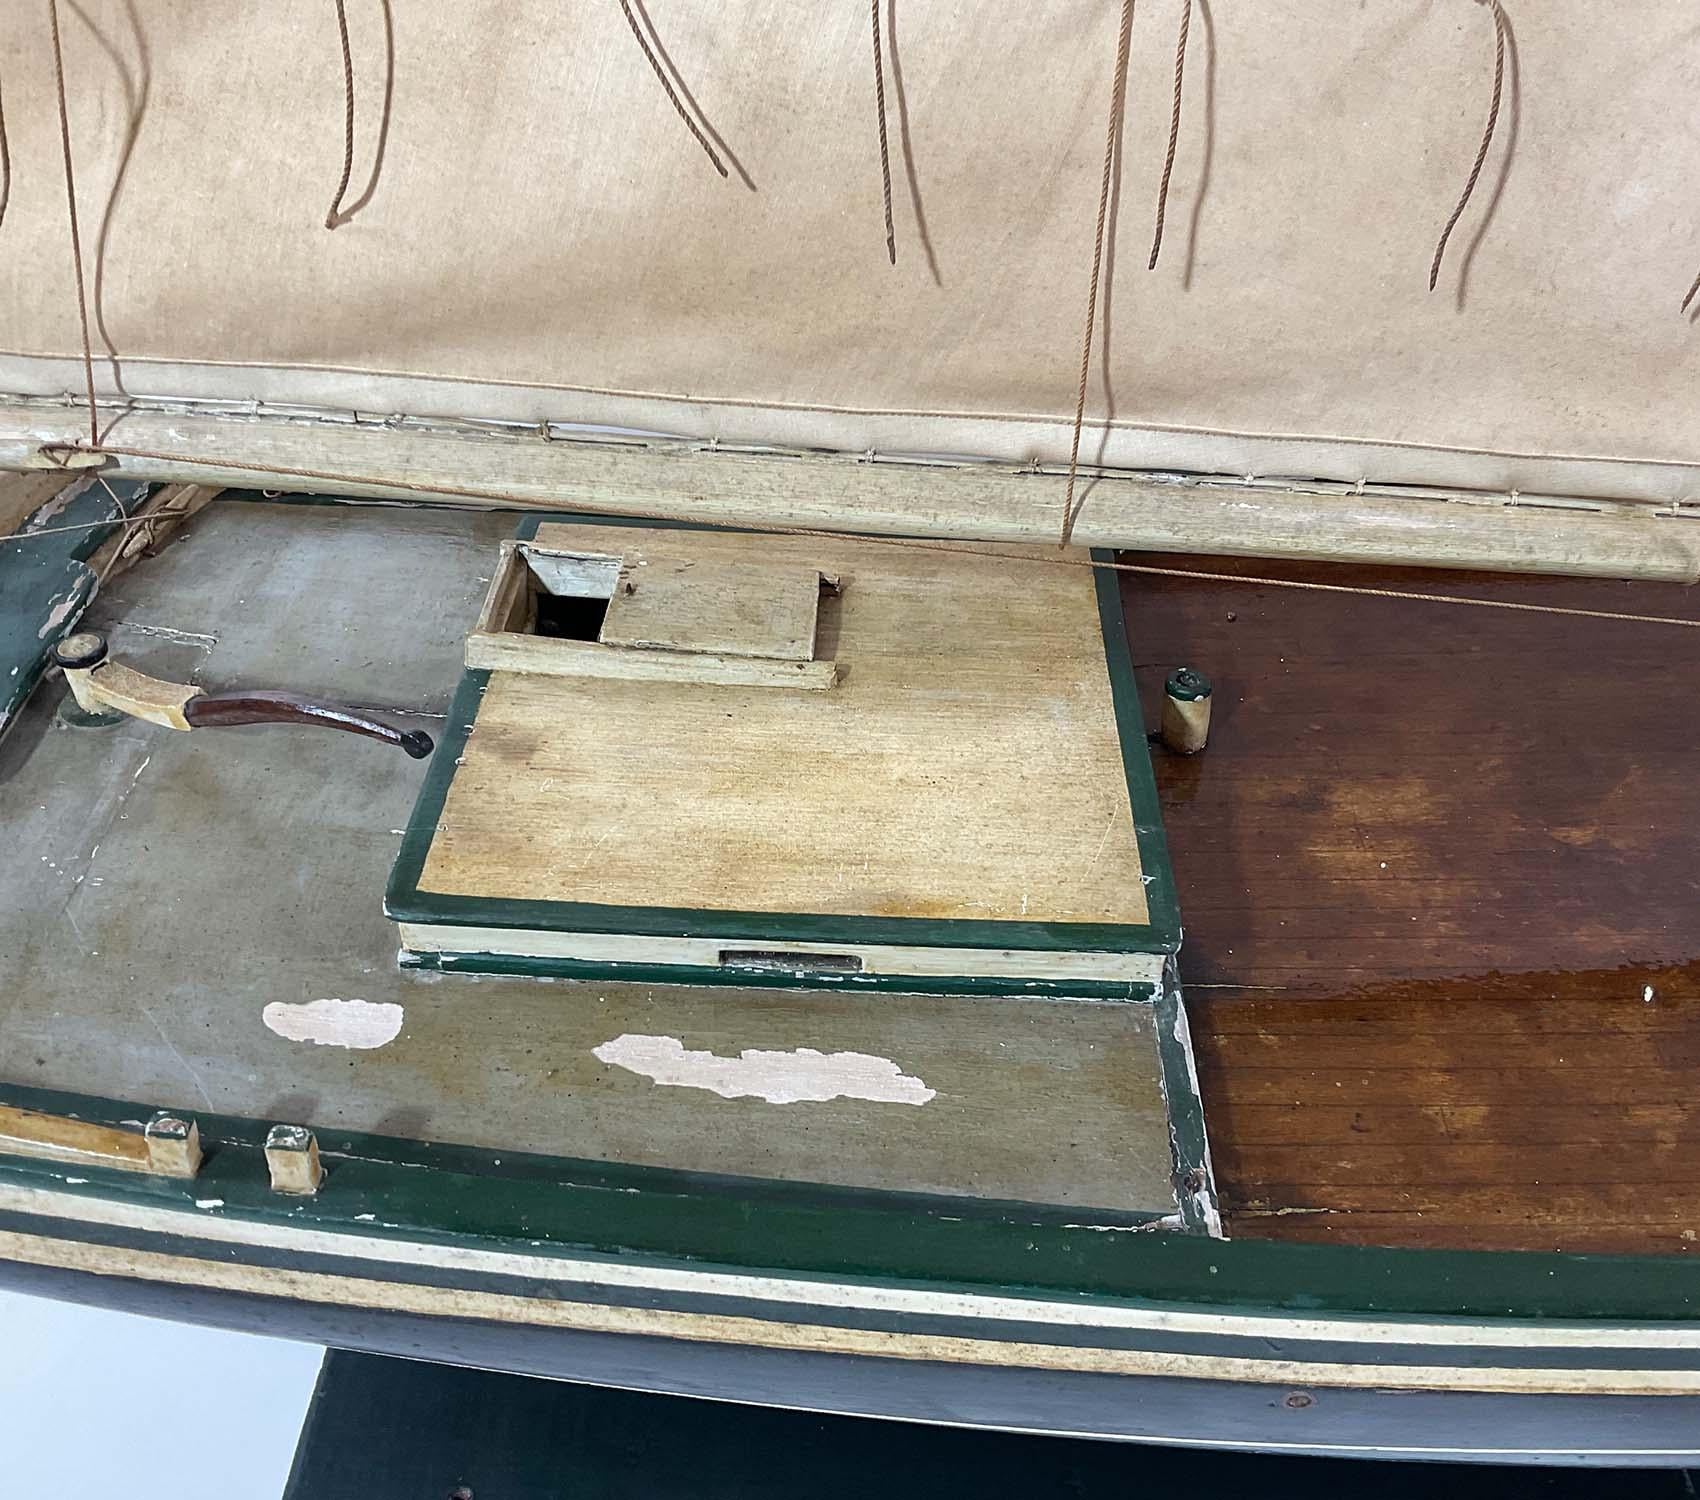 Model of the Oyster Sloop Fanny Fern of Quincy Mass 1